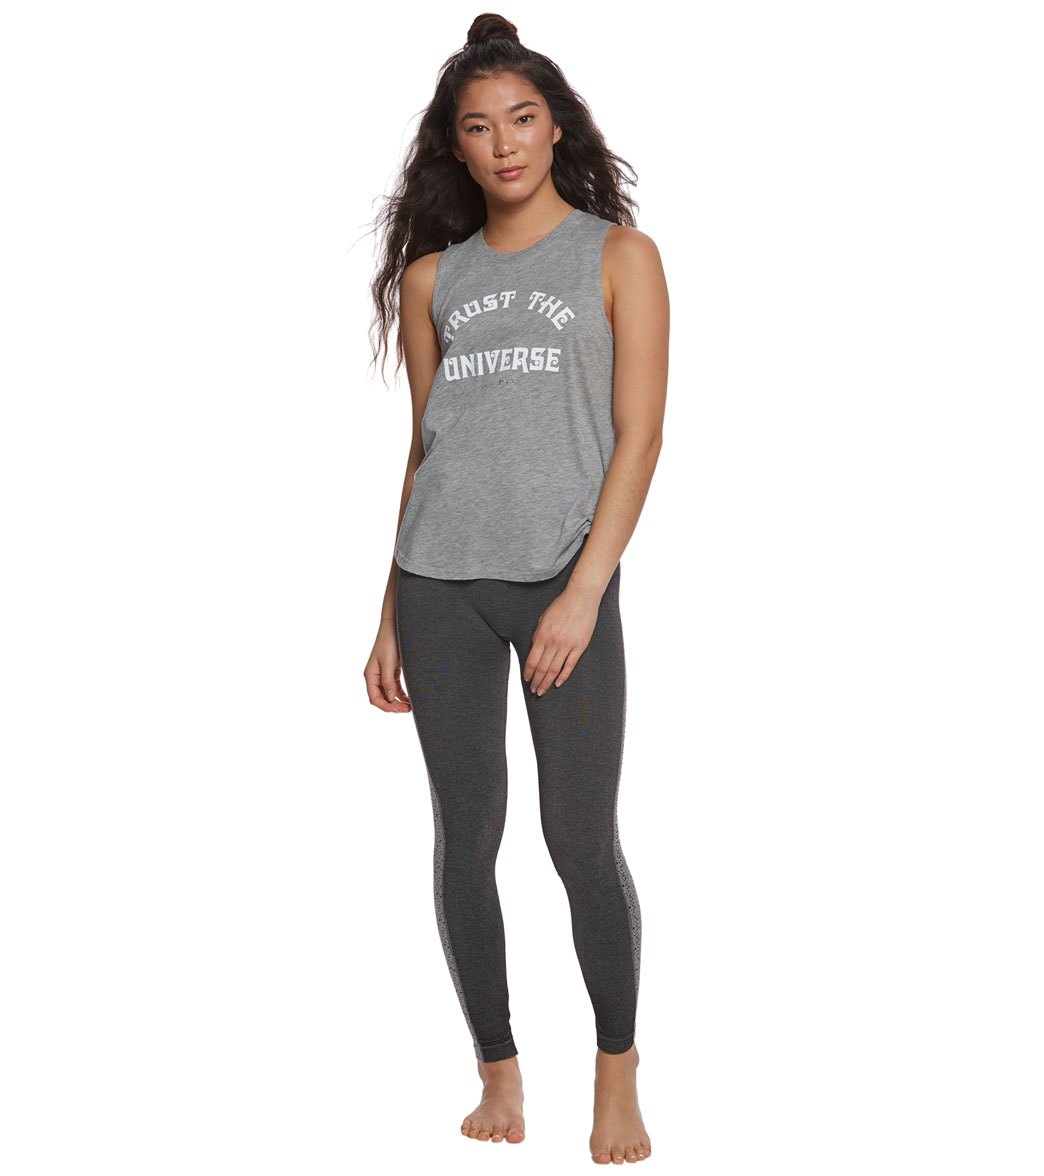 Patience & Strength Legging by FP Movement at Free People - Yoga Leggings